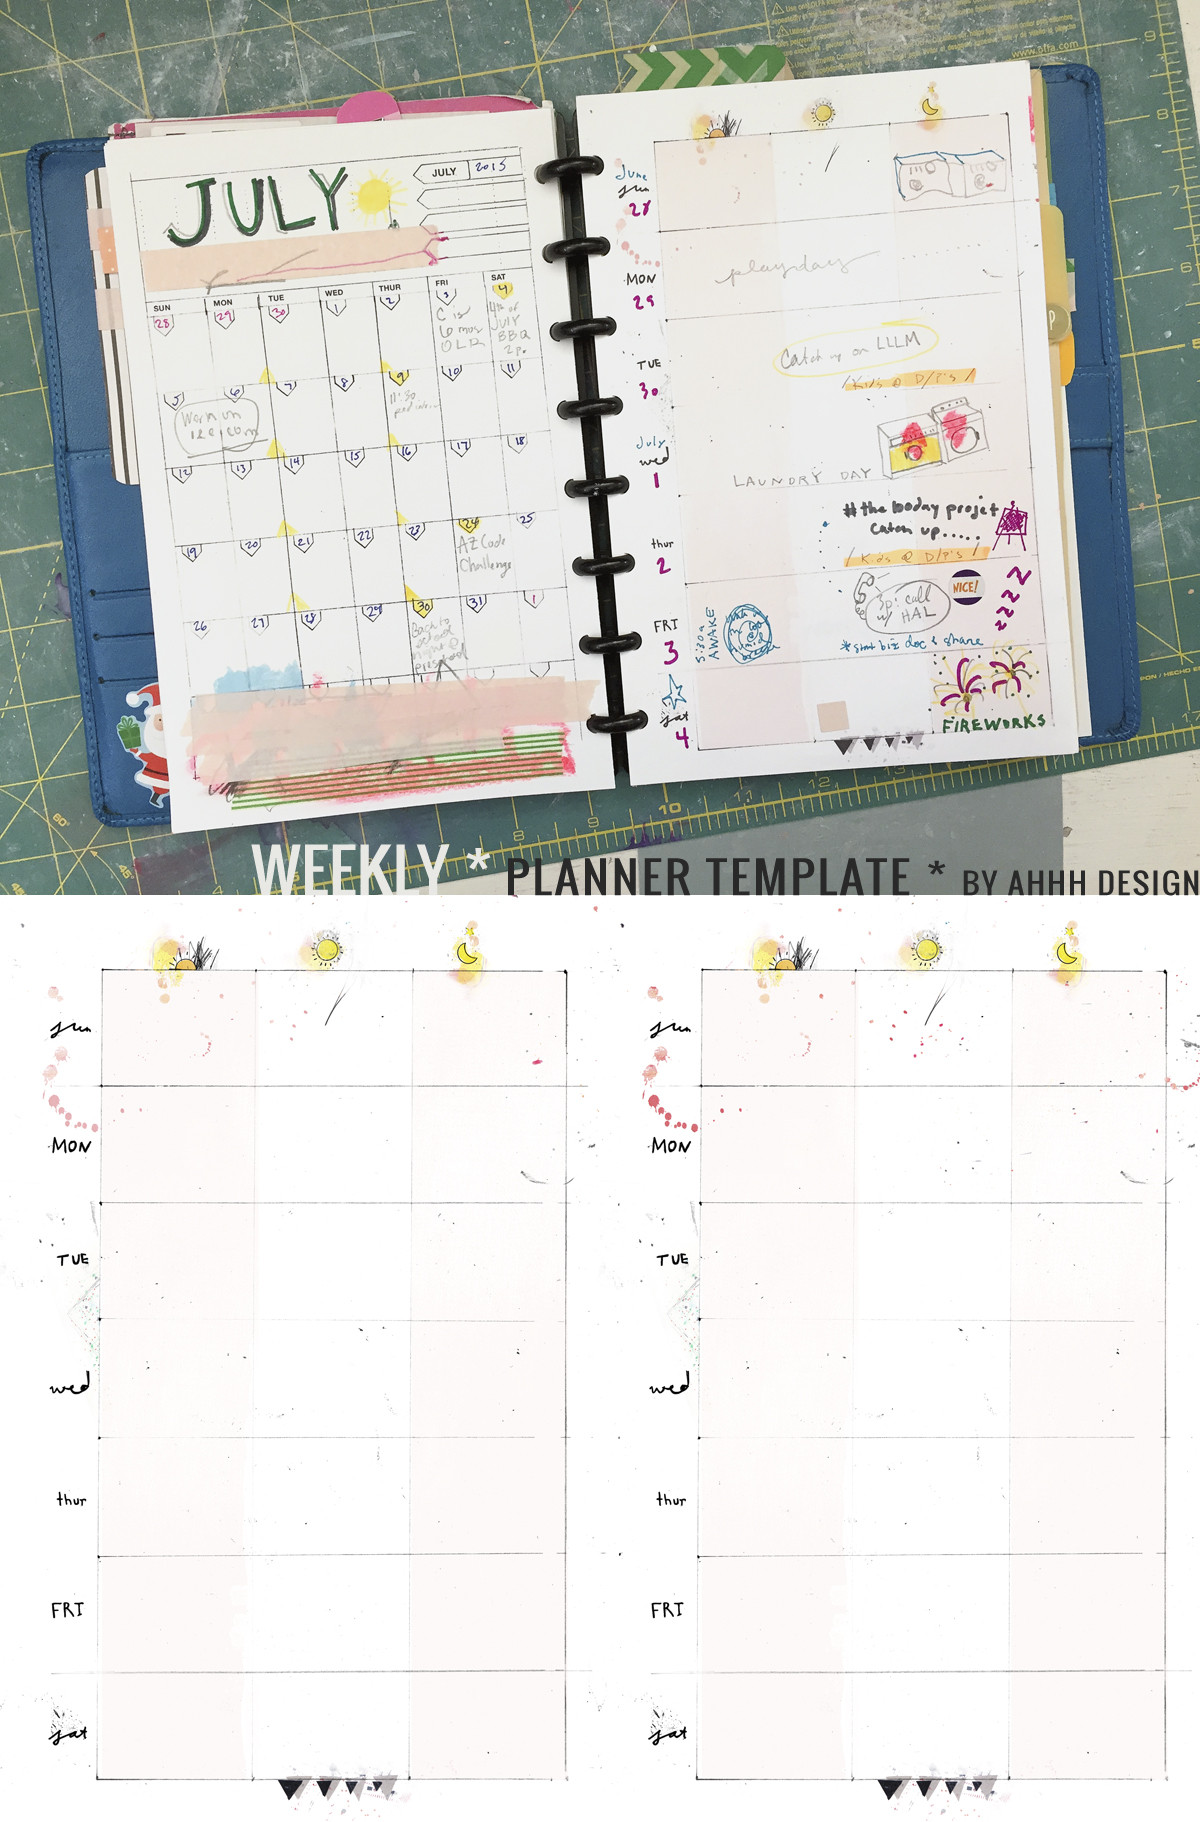 Best ideas about DIY Planner Templates
. Save or Pin diy planner Archives Amanda Hawkins Now.